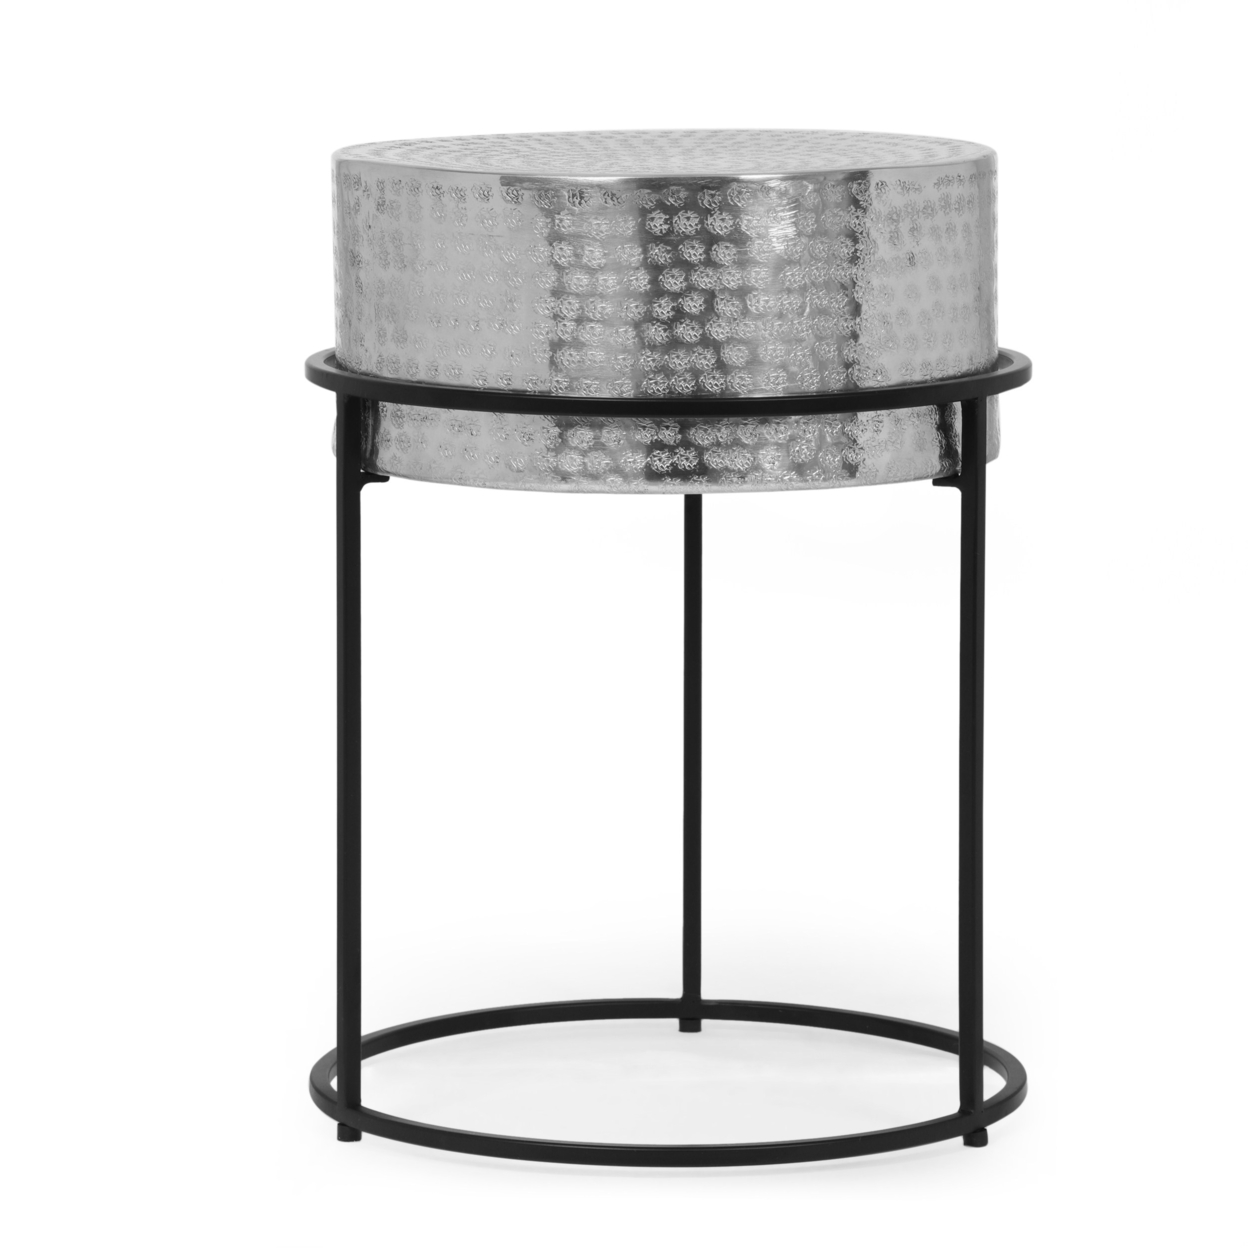 Kolczak Modern Handcrafted Aluminum Round Side Table, Silver And Black